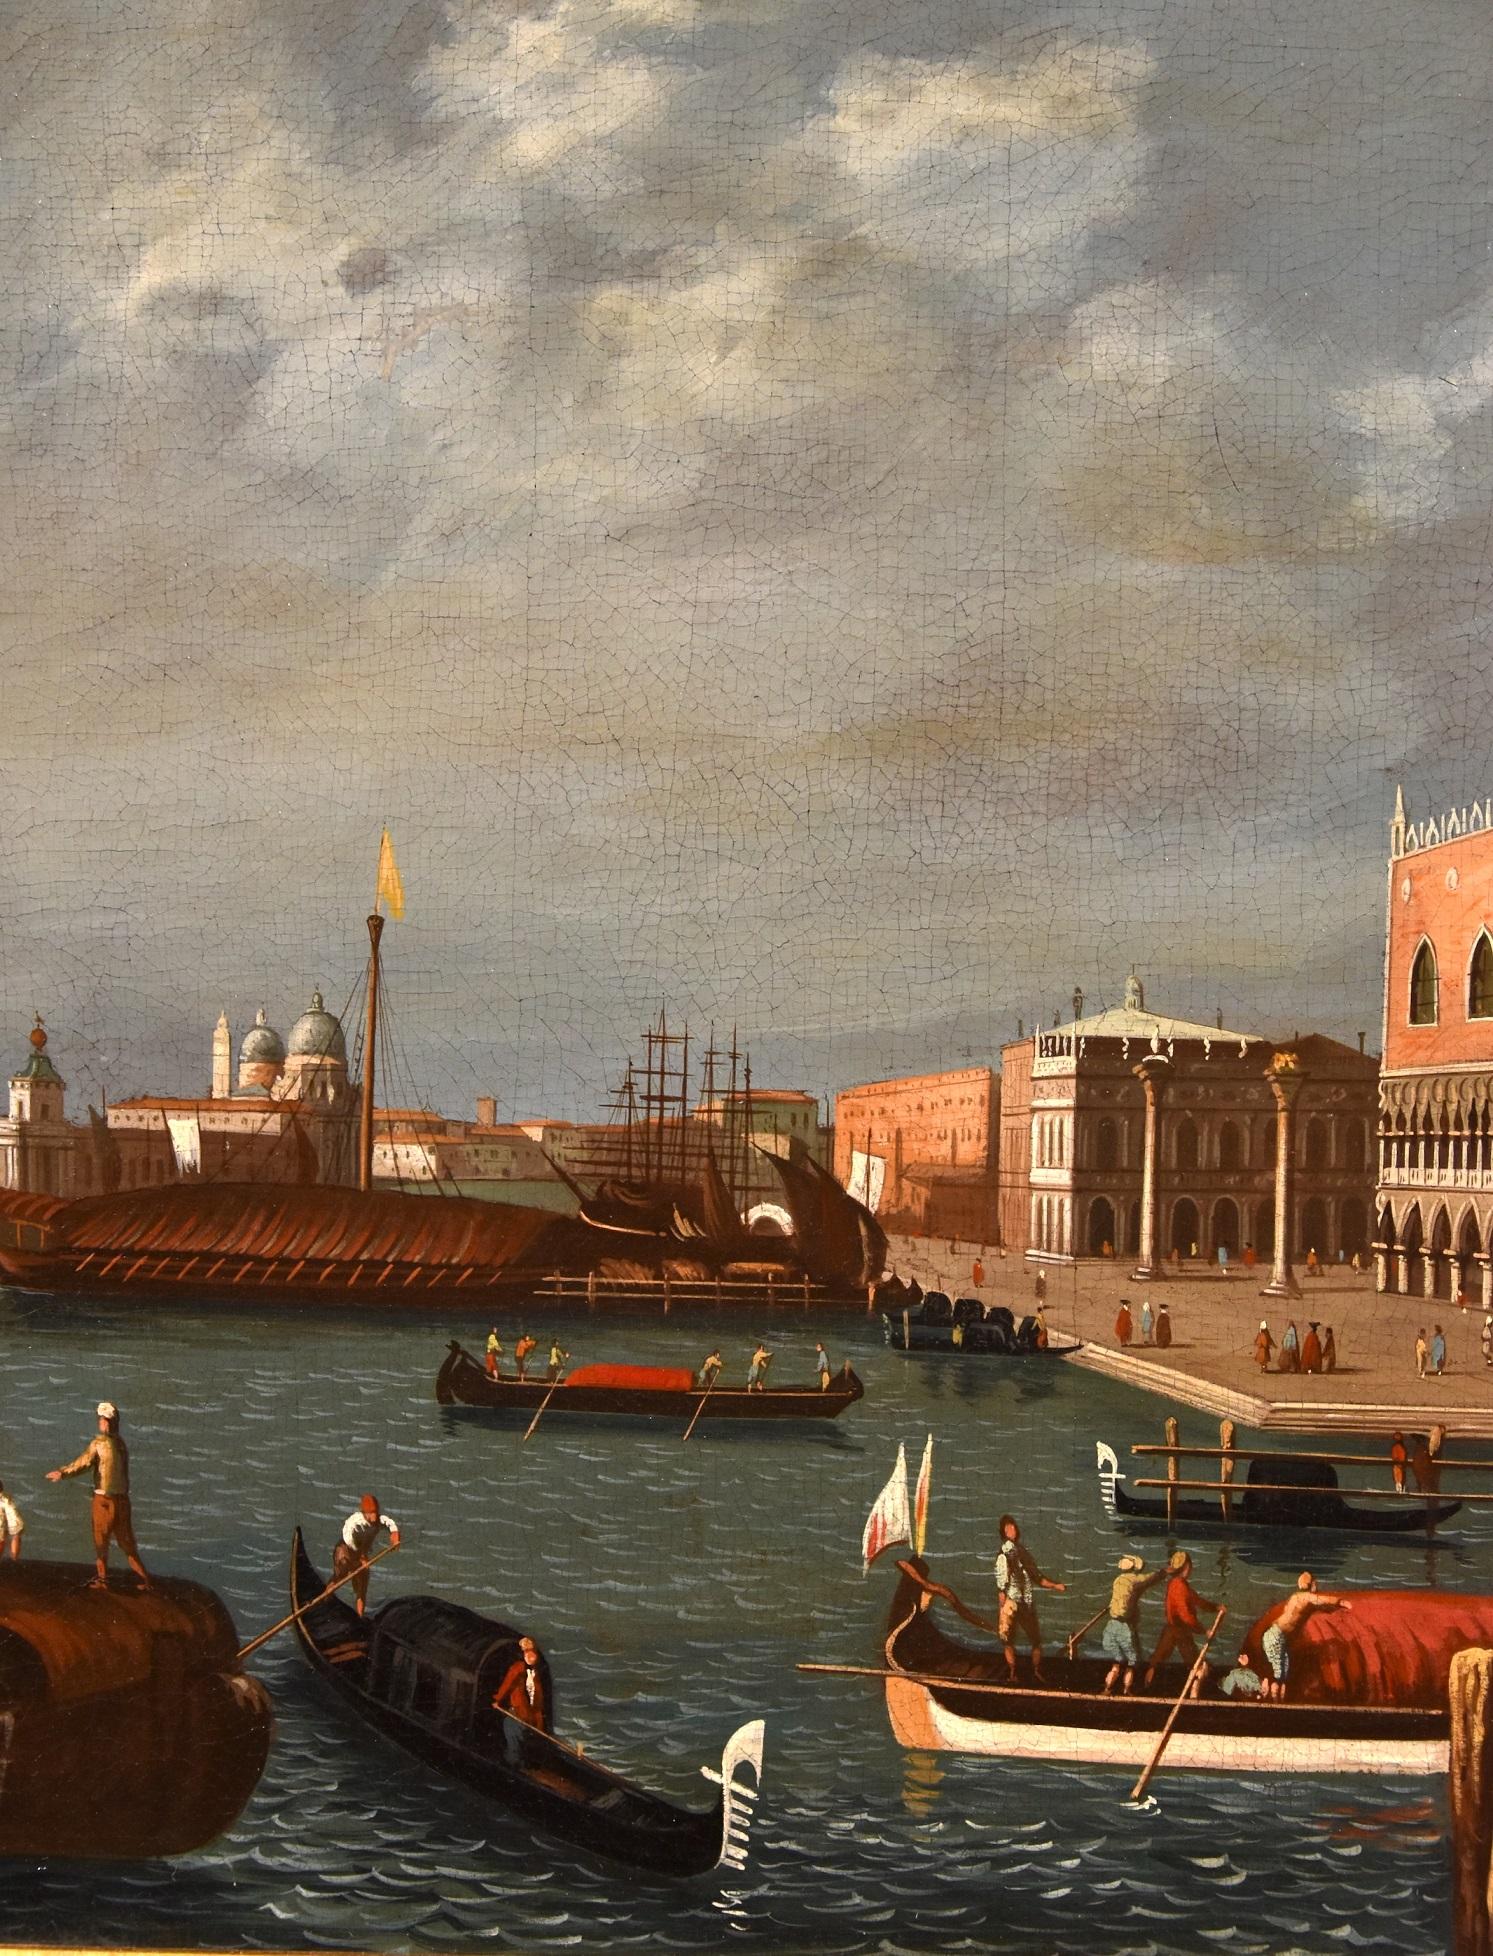 Gabriele Bella (Venice 1730 - Venice 1799)
attributable / follower
View of Venice from the San Marco Basin with the Doge's Palace

oil on canvas - 52 x 67 cm., With frame 70 x 85 cm.

Provenance: Hampel Munich 4.12.2020

Magnificent view of Venice